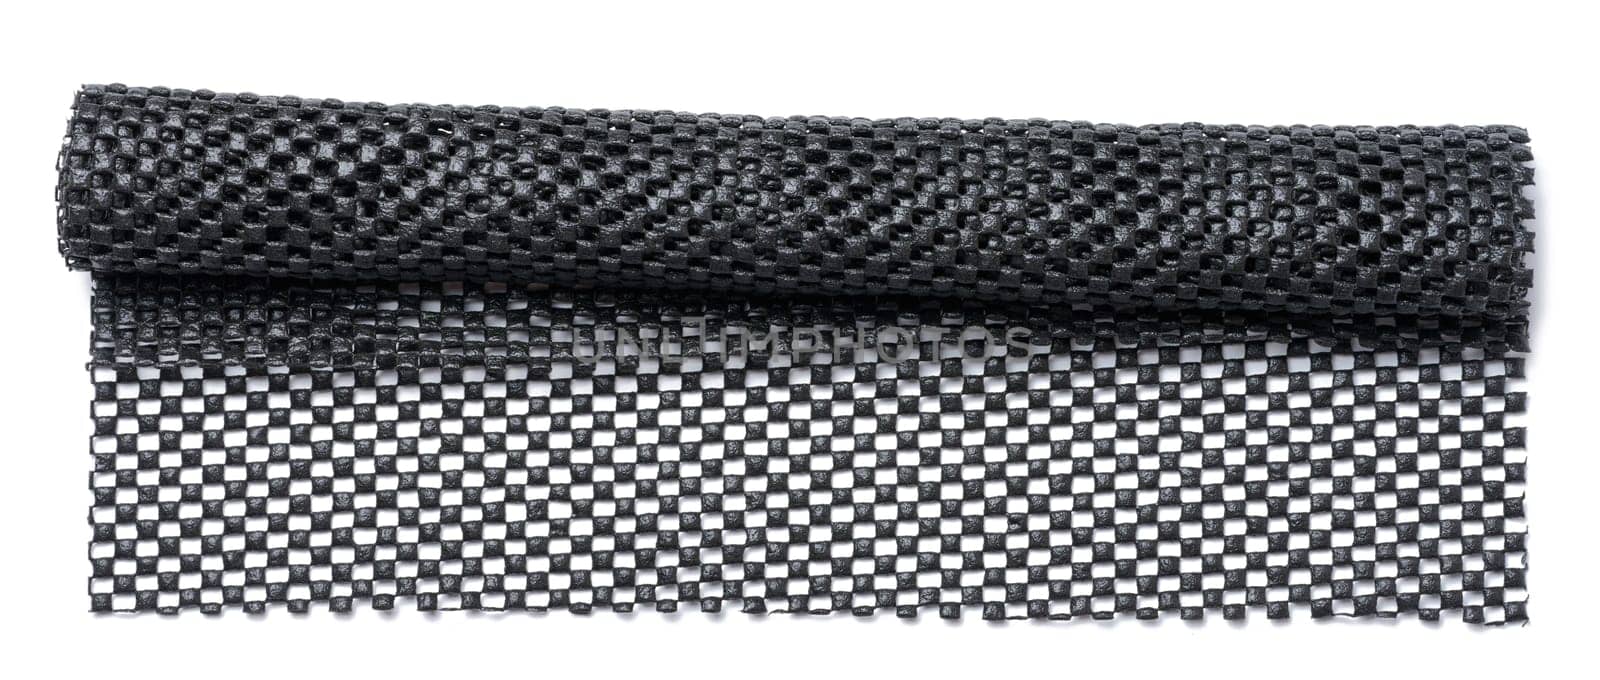 Rolled rubber mat on white isolated background, top view